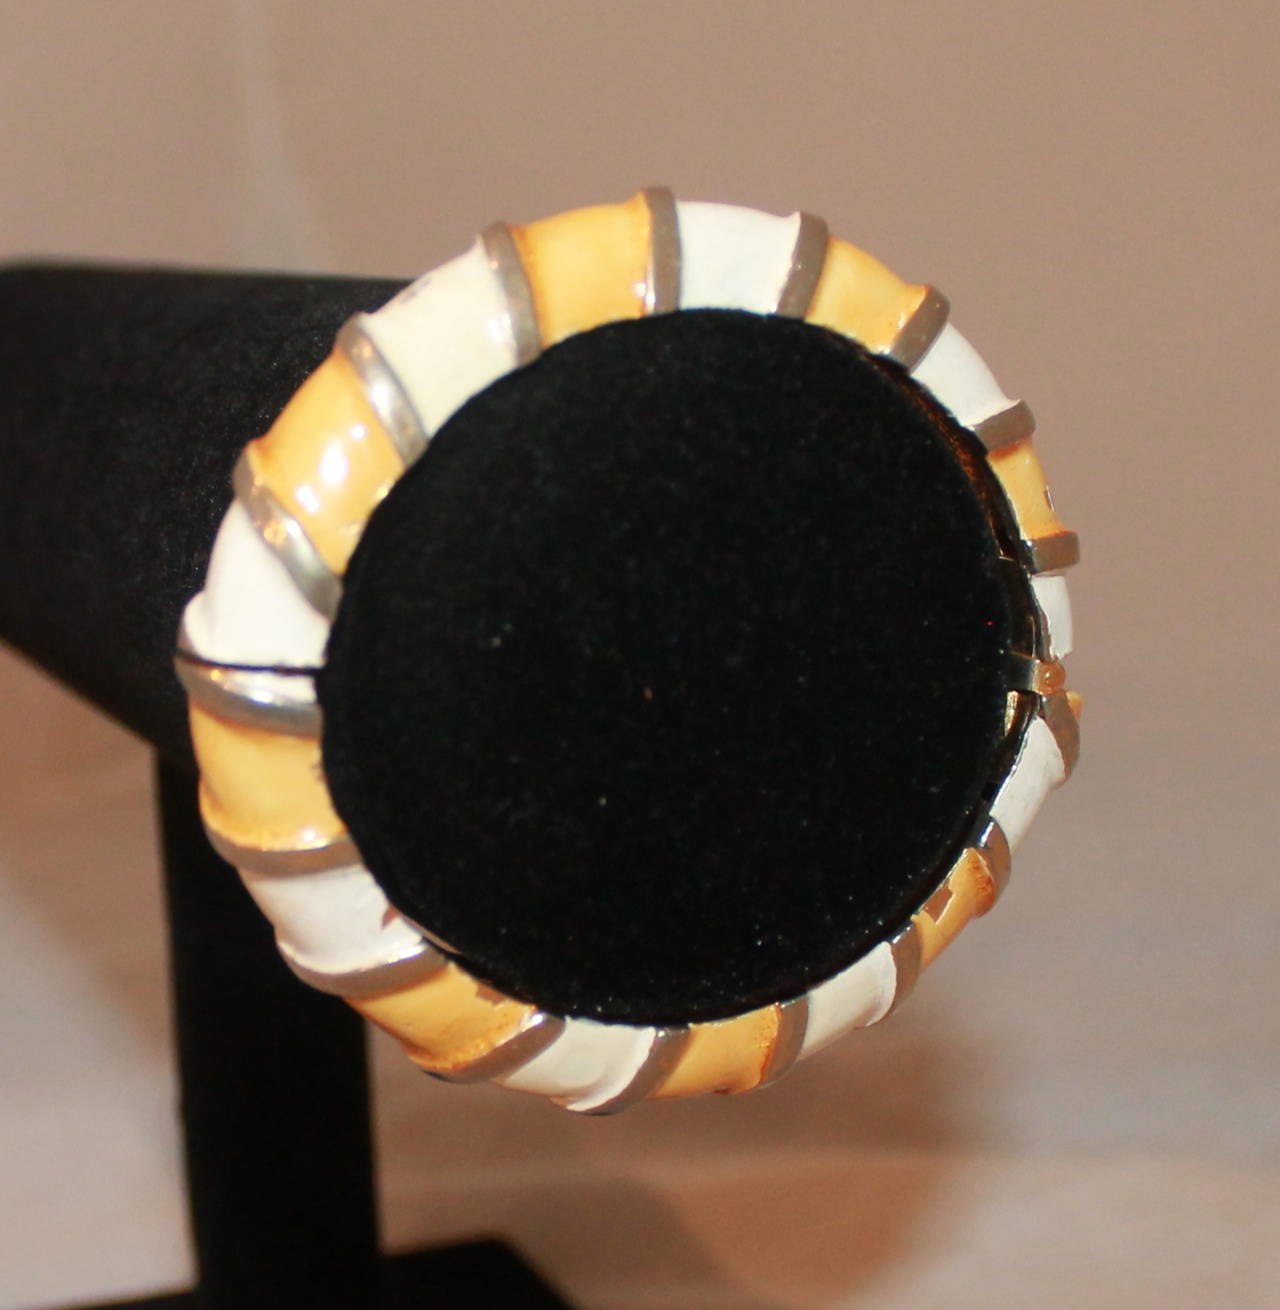 Kenneth Jay Lane Vintage White & Yellow Enamel Gold Bangle - circa 1960. This bangle is in very good vintage condition with two scuffs on the enamel. This was one of KJL's earliest pieces. 

Width- 0.35